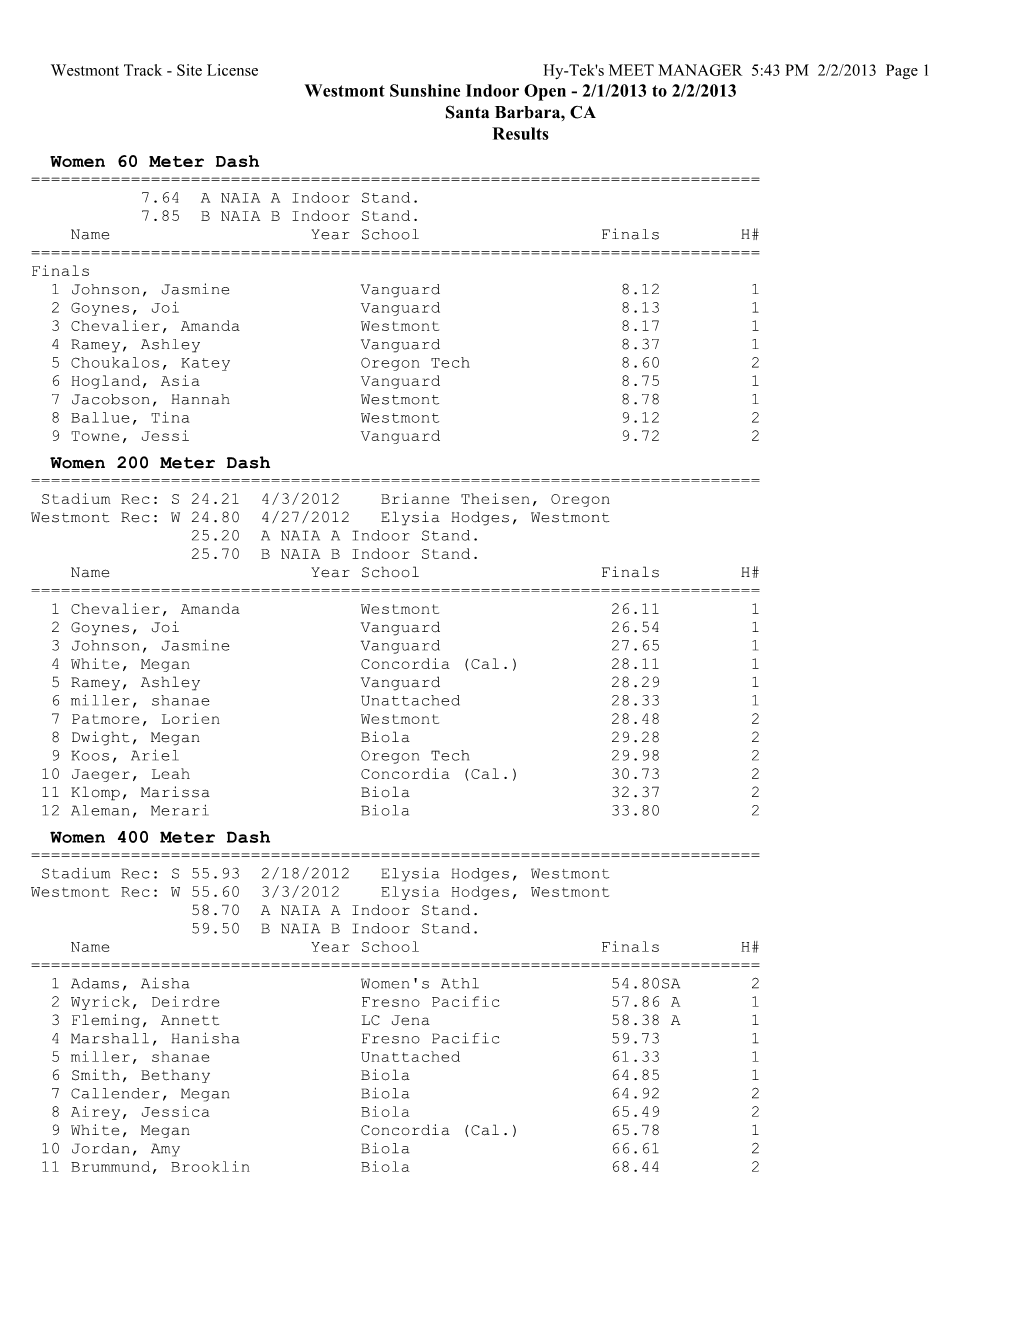 Results Women 60 Meter Dash ======7.64 a NAIA a Indoor Stand